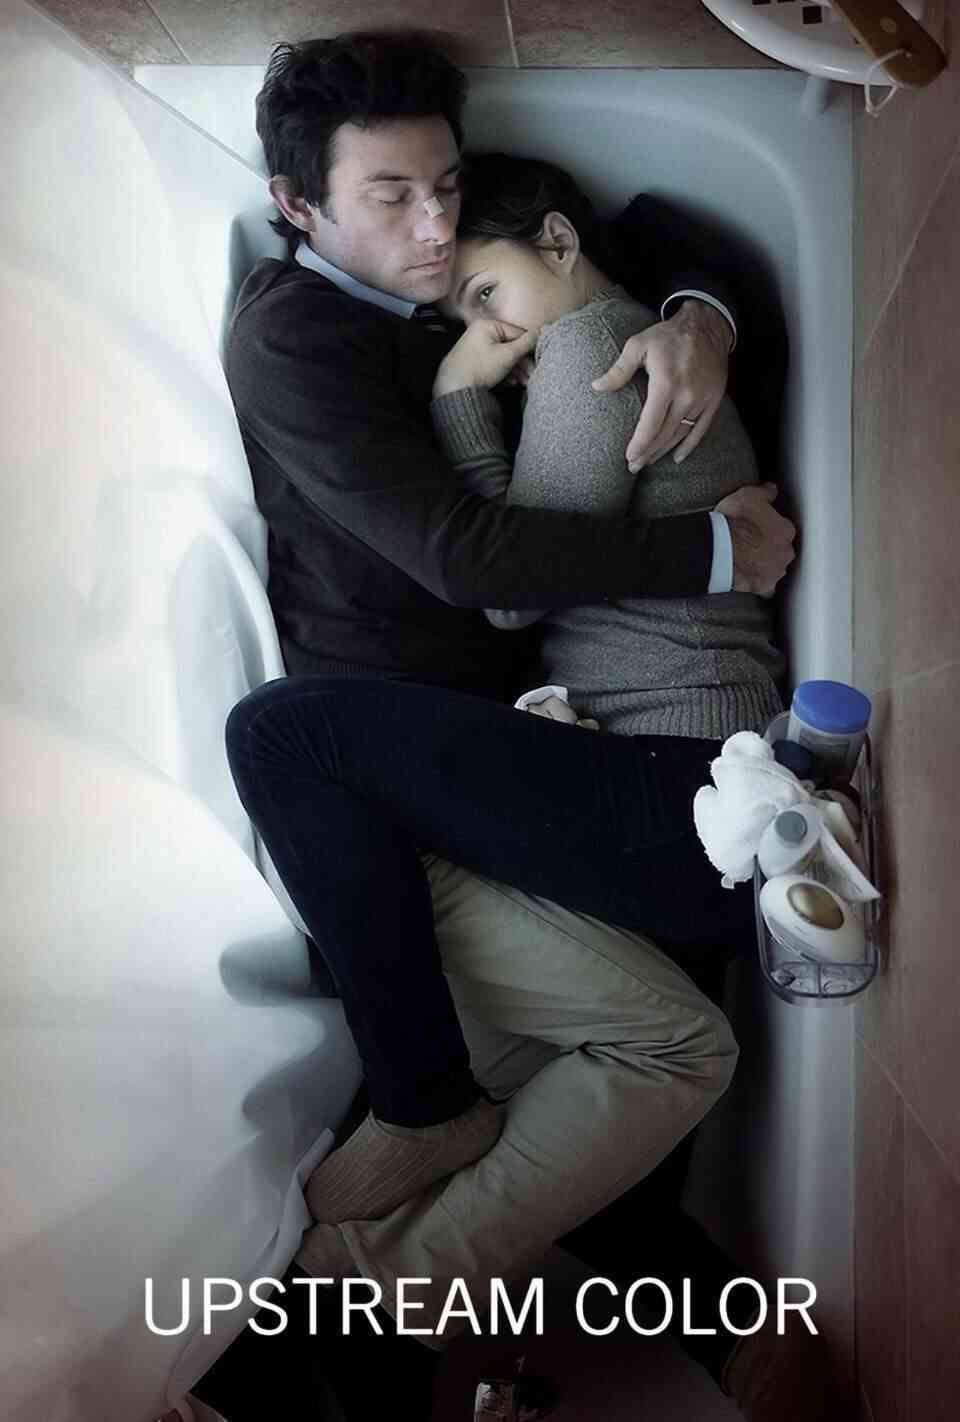 Read Upstream Color screenplay (poster)